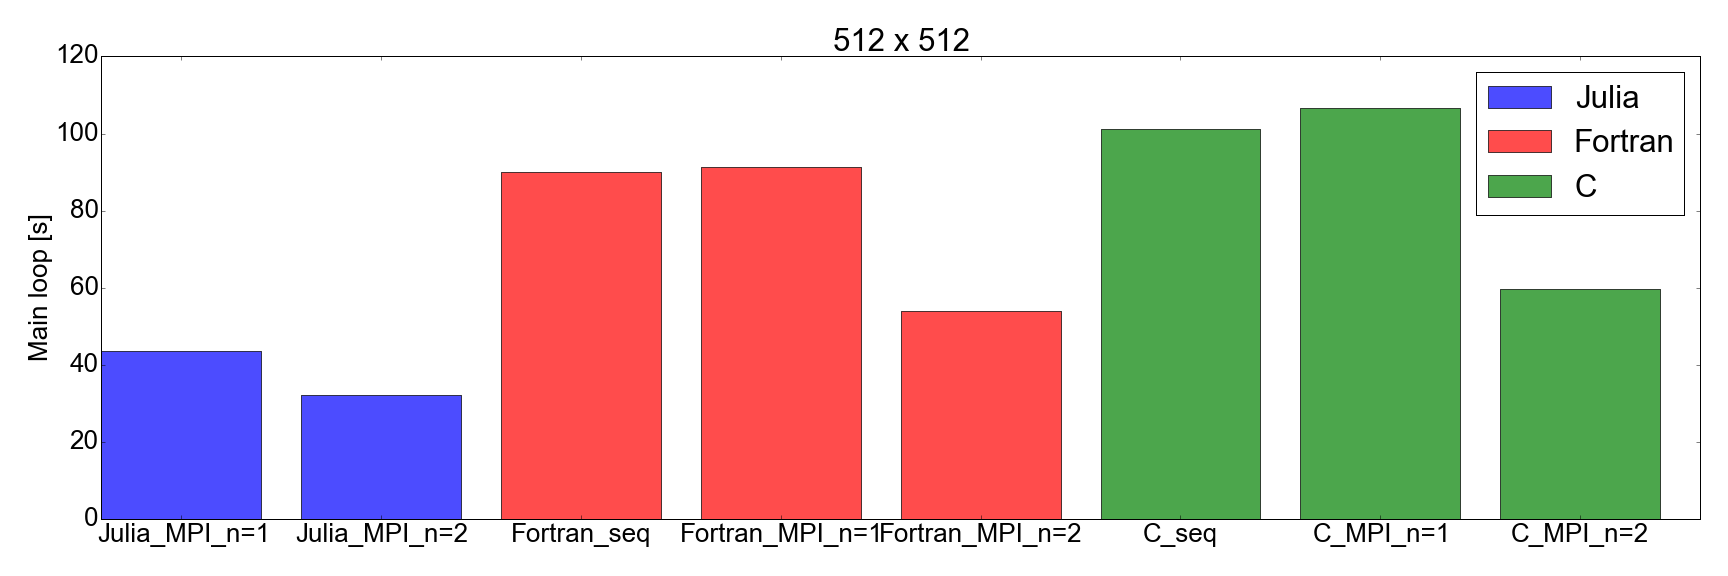 Figure 8. Performance of Julia vs. Fortran vs. C for two grid sizes: 256x256 (top) and 512x512 (bottom). It shows Julia to be the best performing language. Performance is measured as the time needed to complete a fixed number of iterations in the main loop of the code.